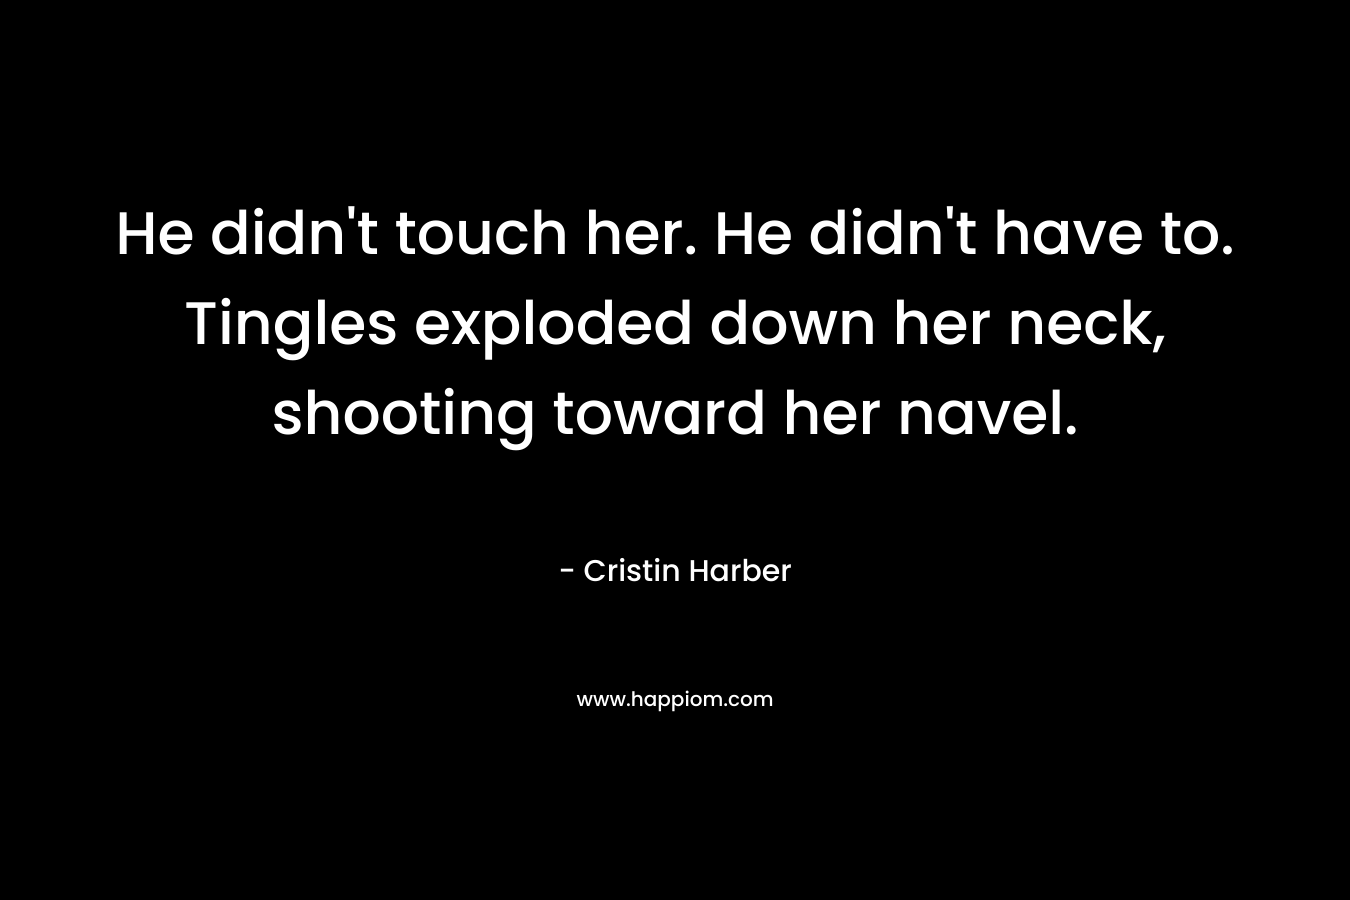 He didn't touch her. He didn't have to. Tingles exploded down her neck, shooting toward her navel.